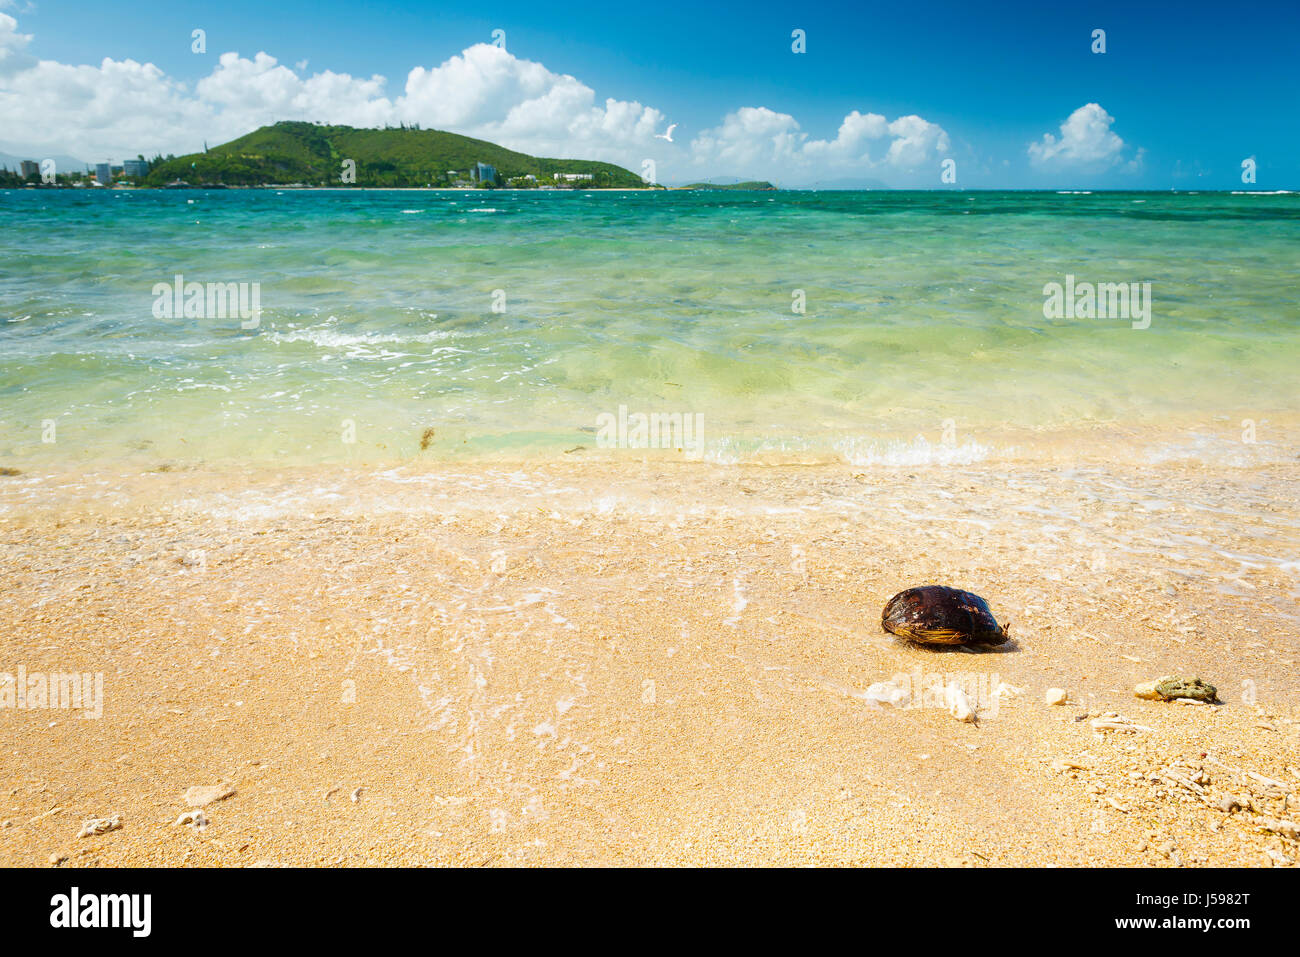 Hot summer beach scene in tropical Noumea, New Caledonia with coconut shell on sand Stock Photo